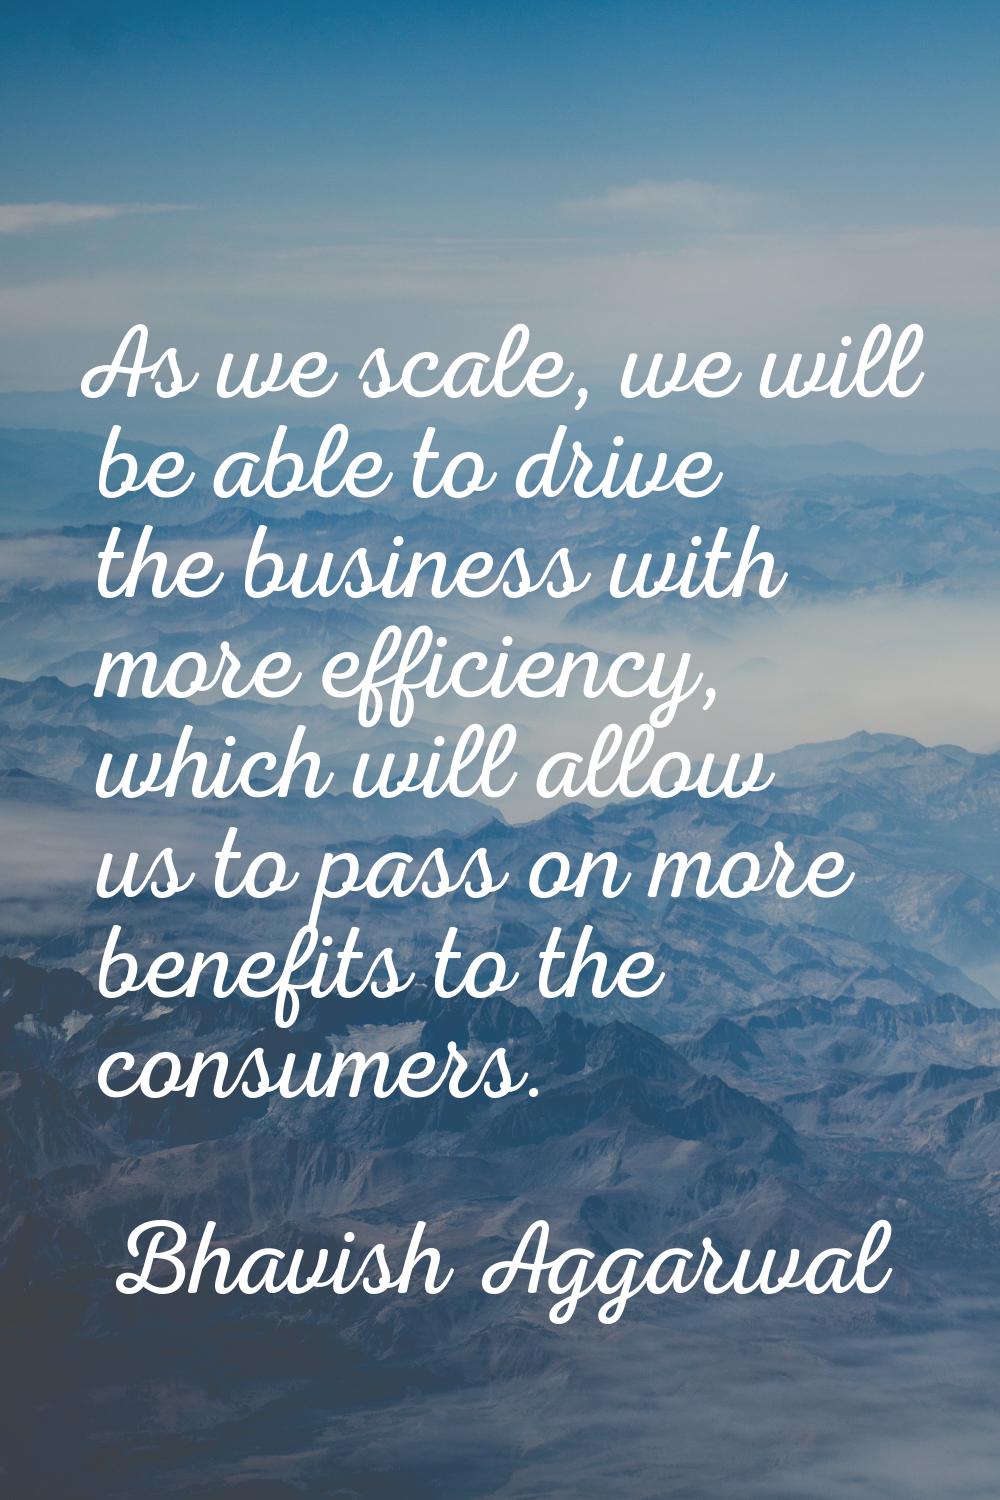 As we scale, we will be able to drive the business with more efficiency, which will allow us to pas